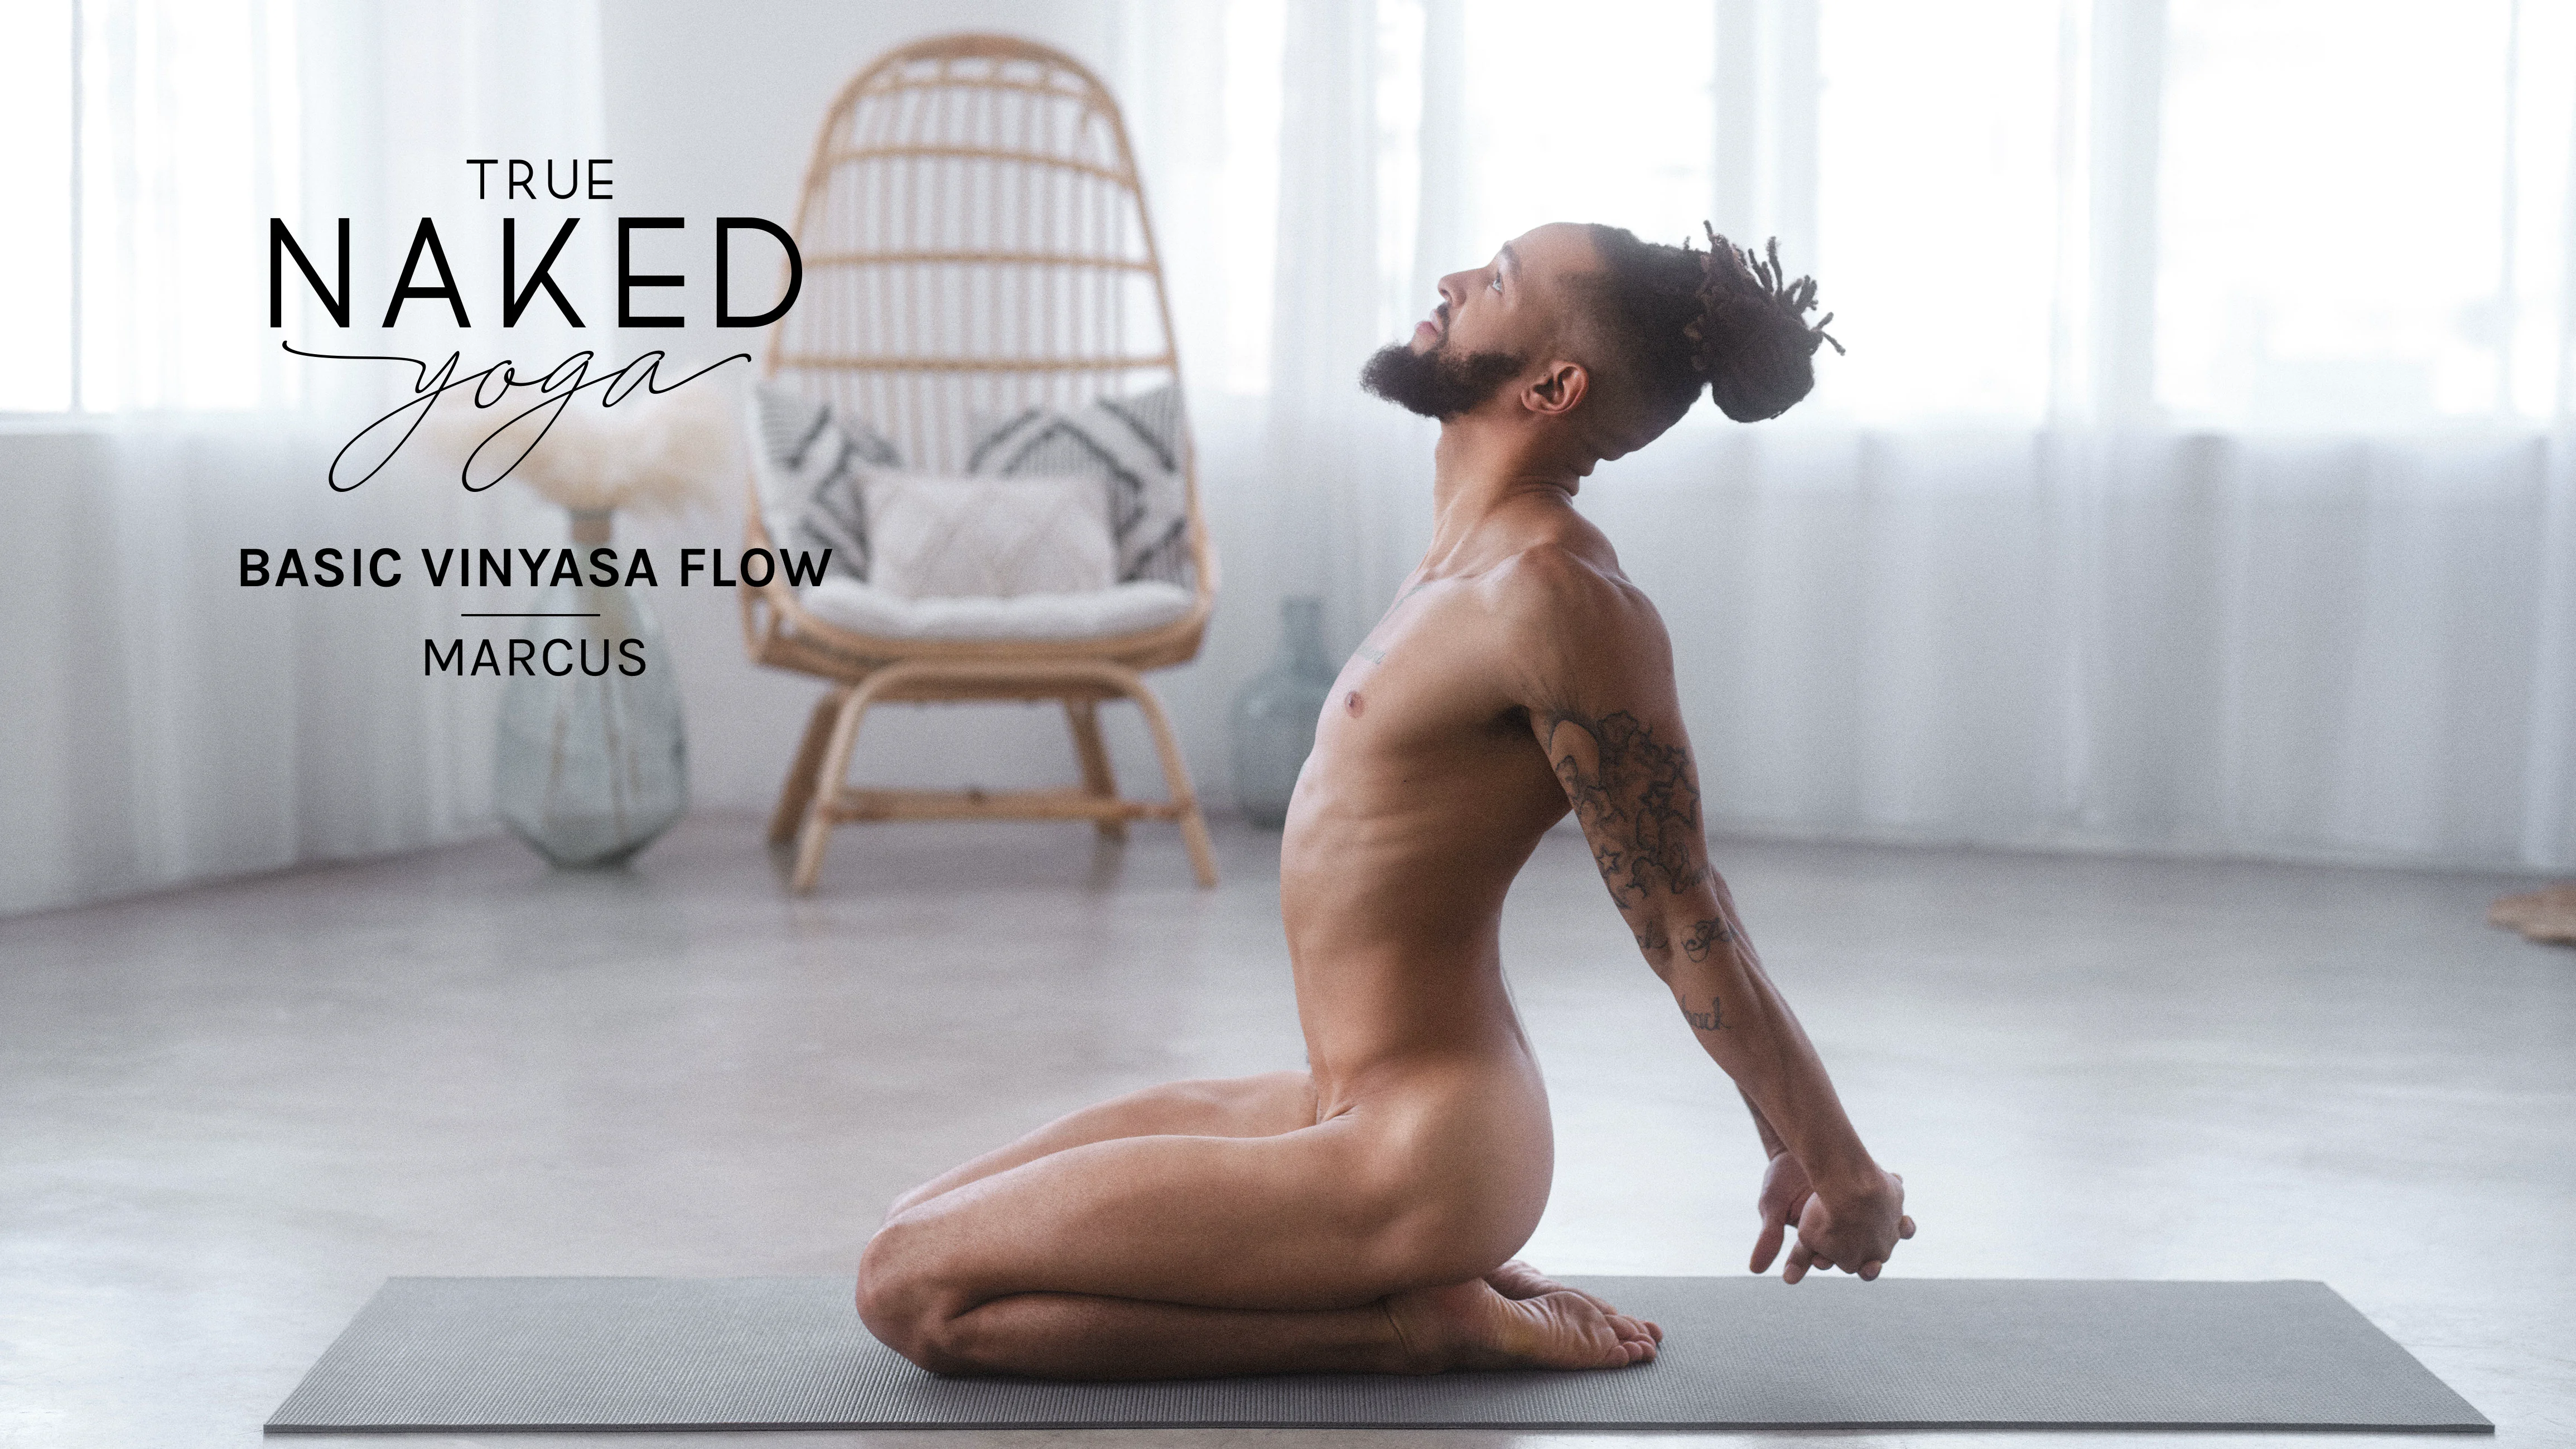 Watch True Naked Yoga Male – Basic Vinyasa Flow with Marcus Online